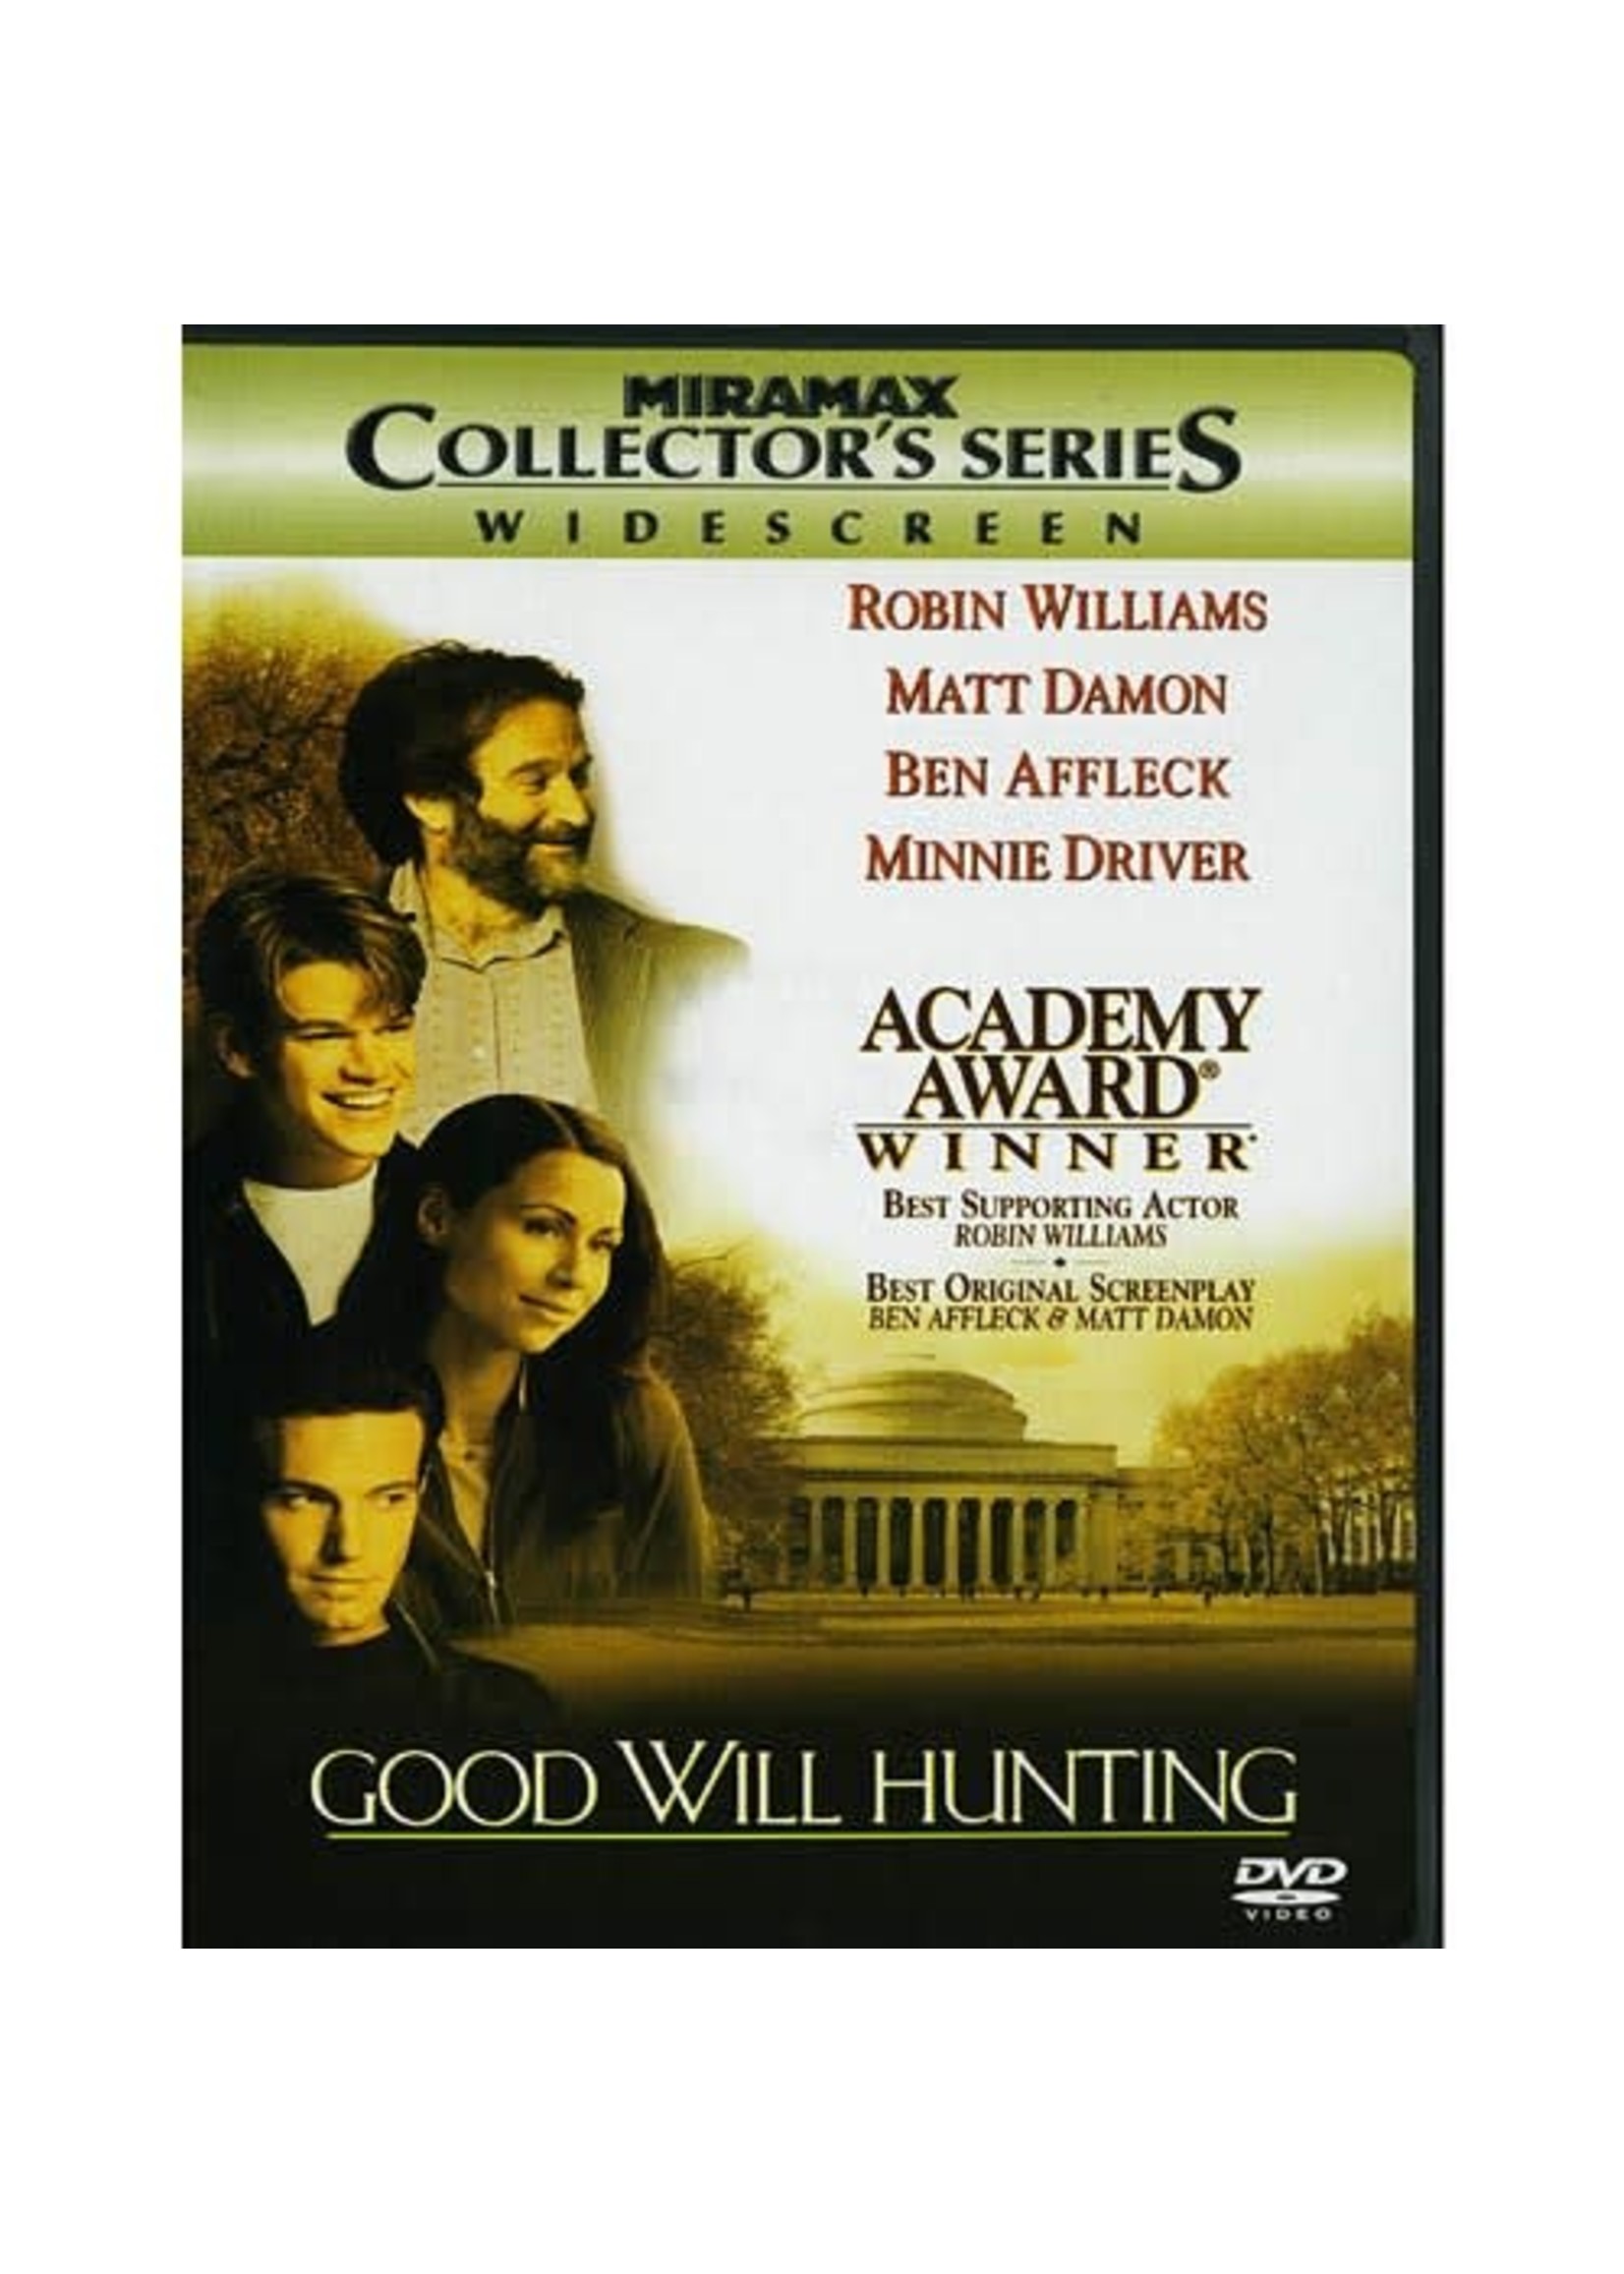 Good Will Hunting (Widescreen) DVD